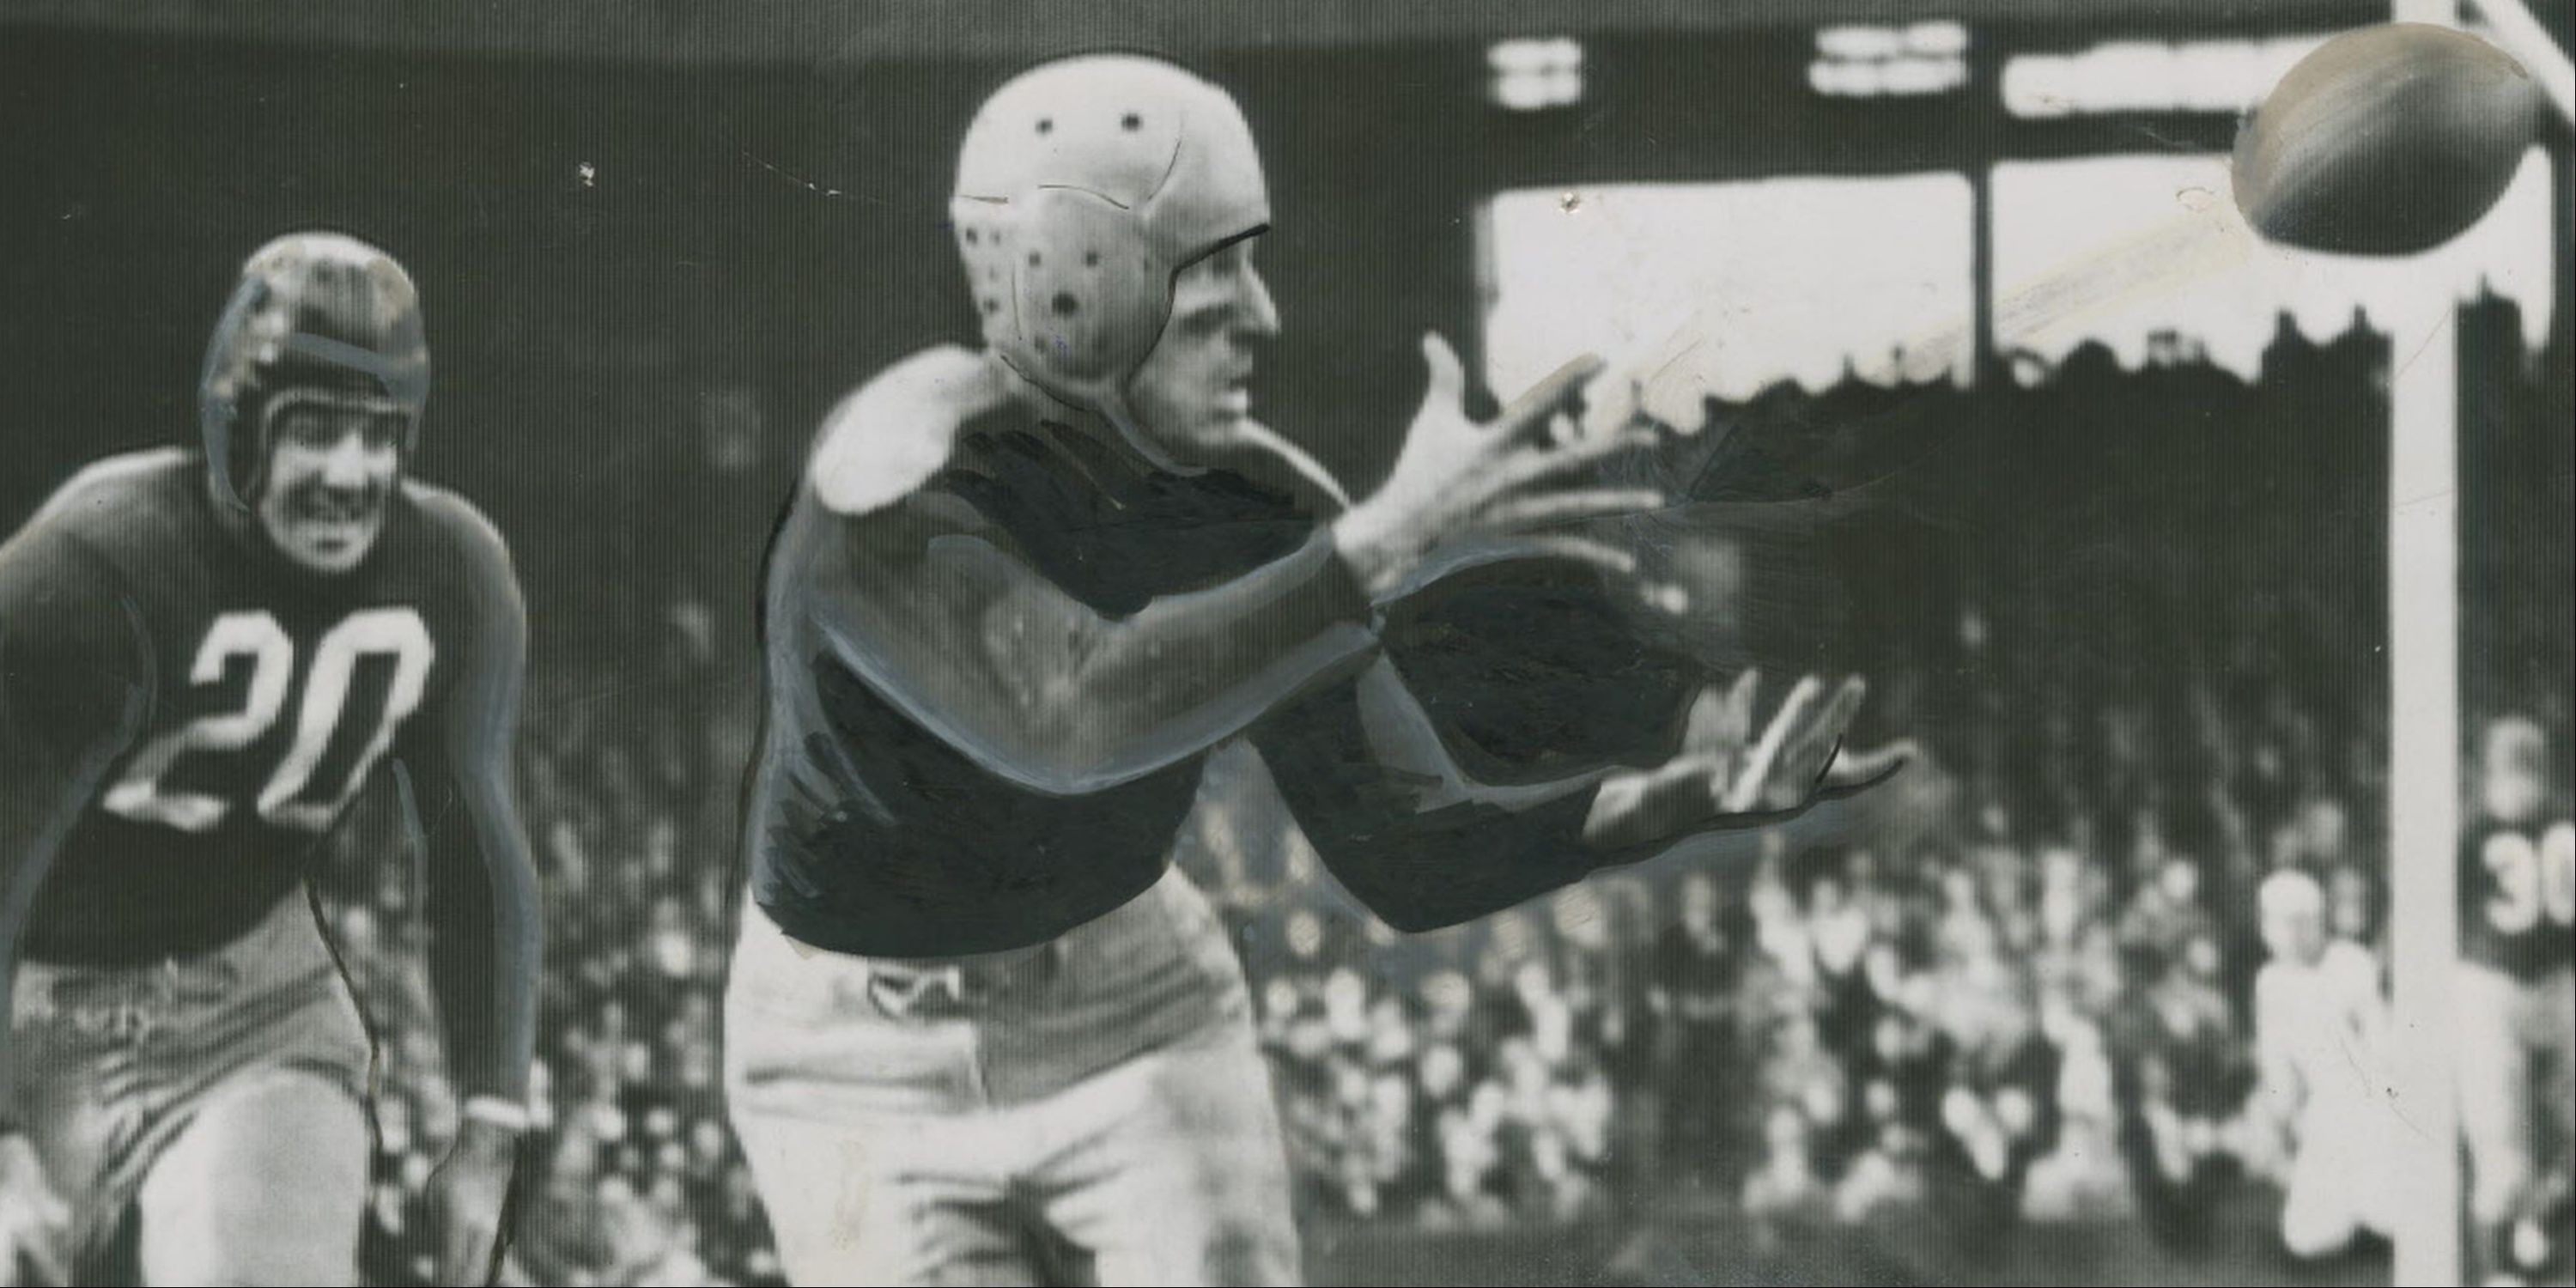 Green Bay Packers wide receiver Don Hutson making a catch